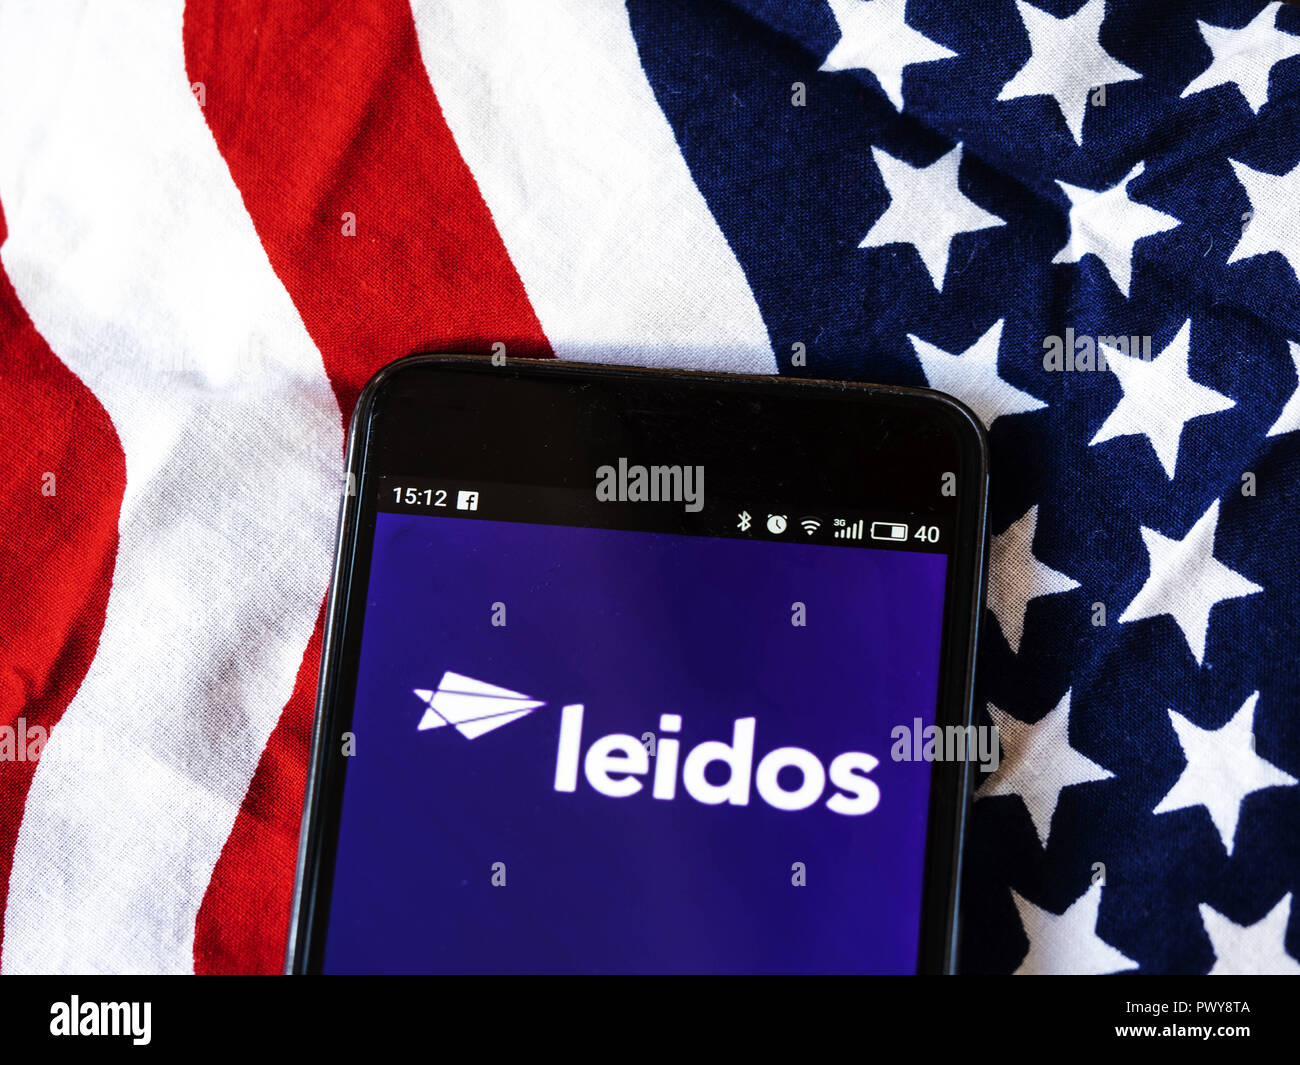 Kiev, Ukraine. 18th Oct, 2018. Leidos Scientific research company logo seen displayed on smart phone. Leidos, formerly known as Science Applications International Corporation, is an American defense, aviation, information technology, and biomedical research company, that provides scientific, engineering, systems integration, and technical services. Credit: Igor Golovniov/SOPA Images/ZUMA Wire/Alamy Live News Stock Photo